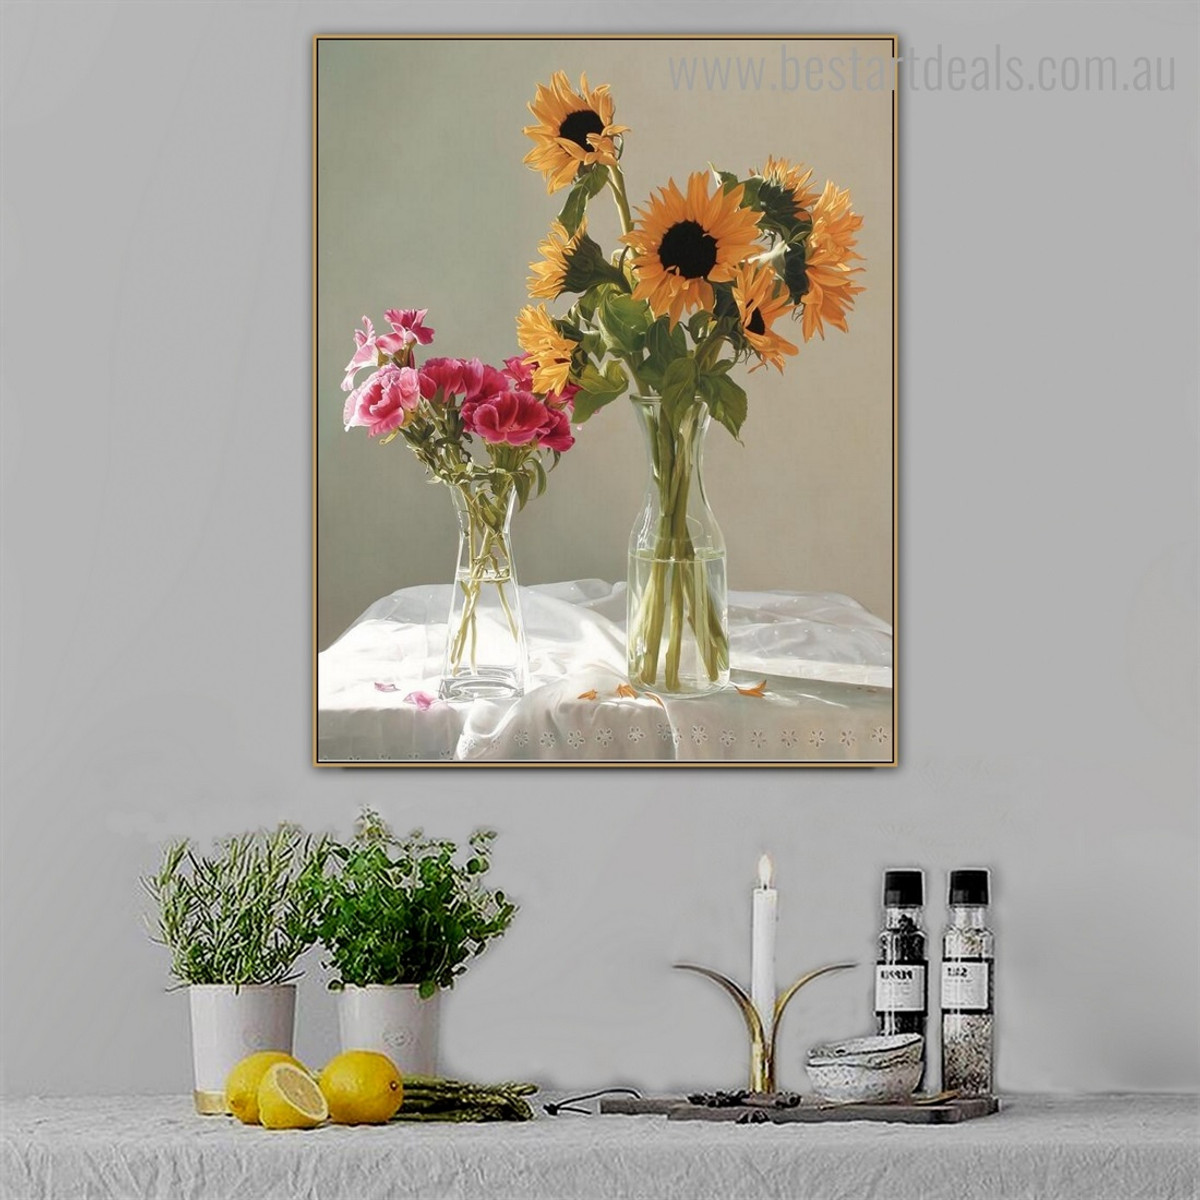 Sunflower Vase Floral Modern Framed Portrayal Photo Canvas Print for Room Wall Outfit
